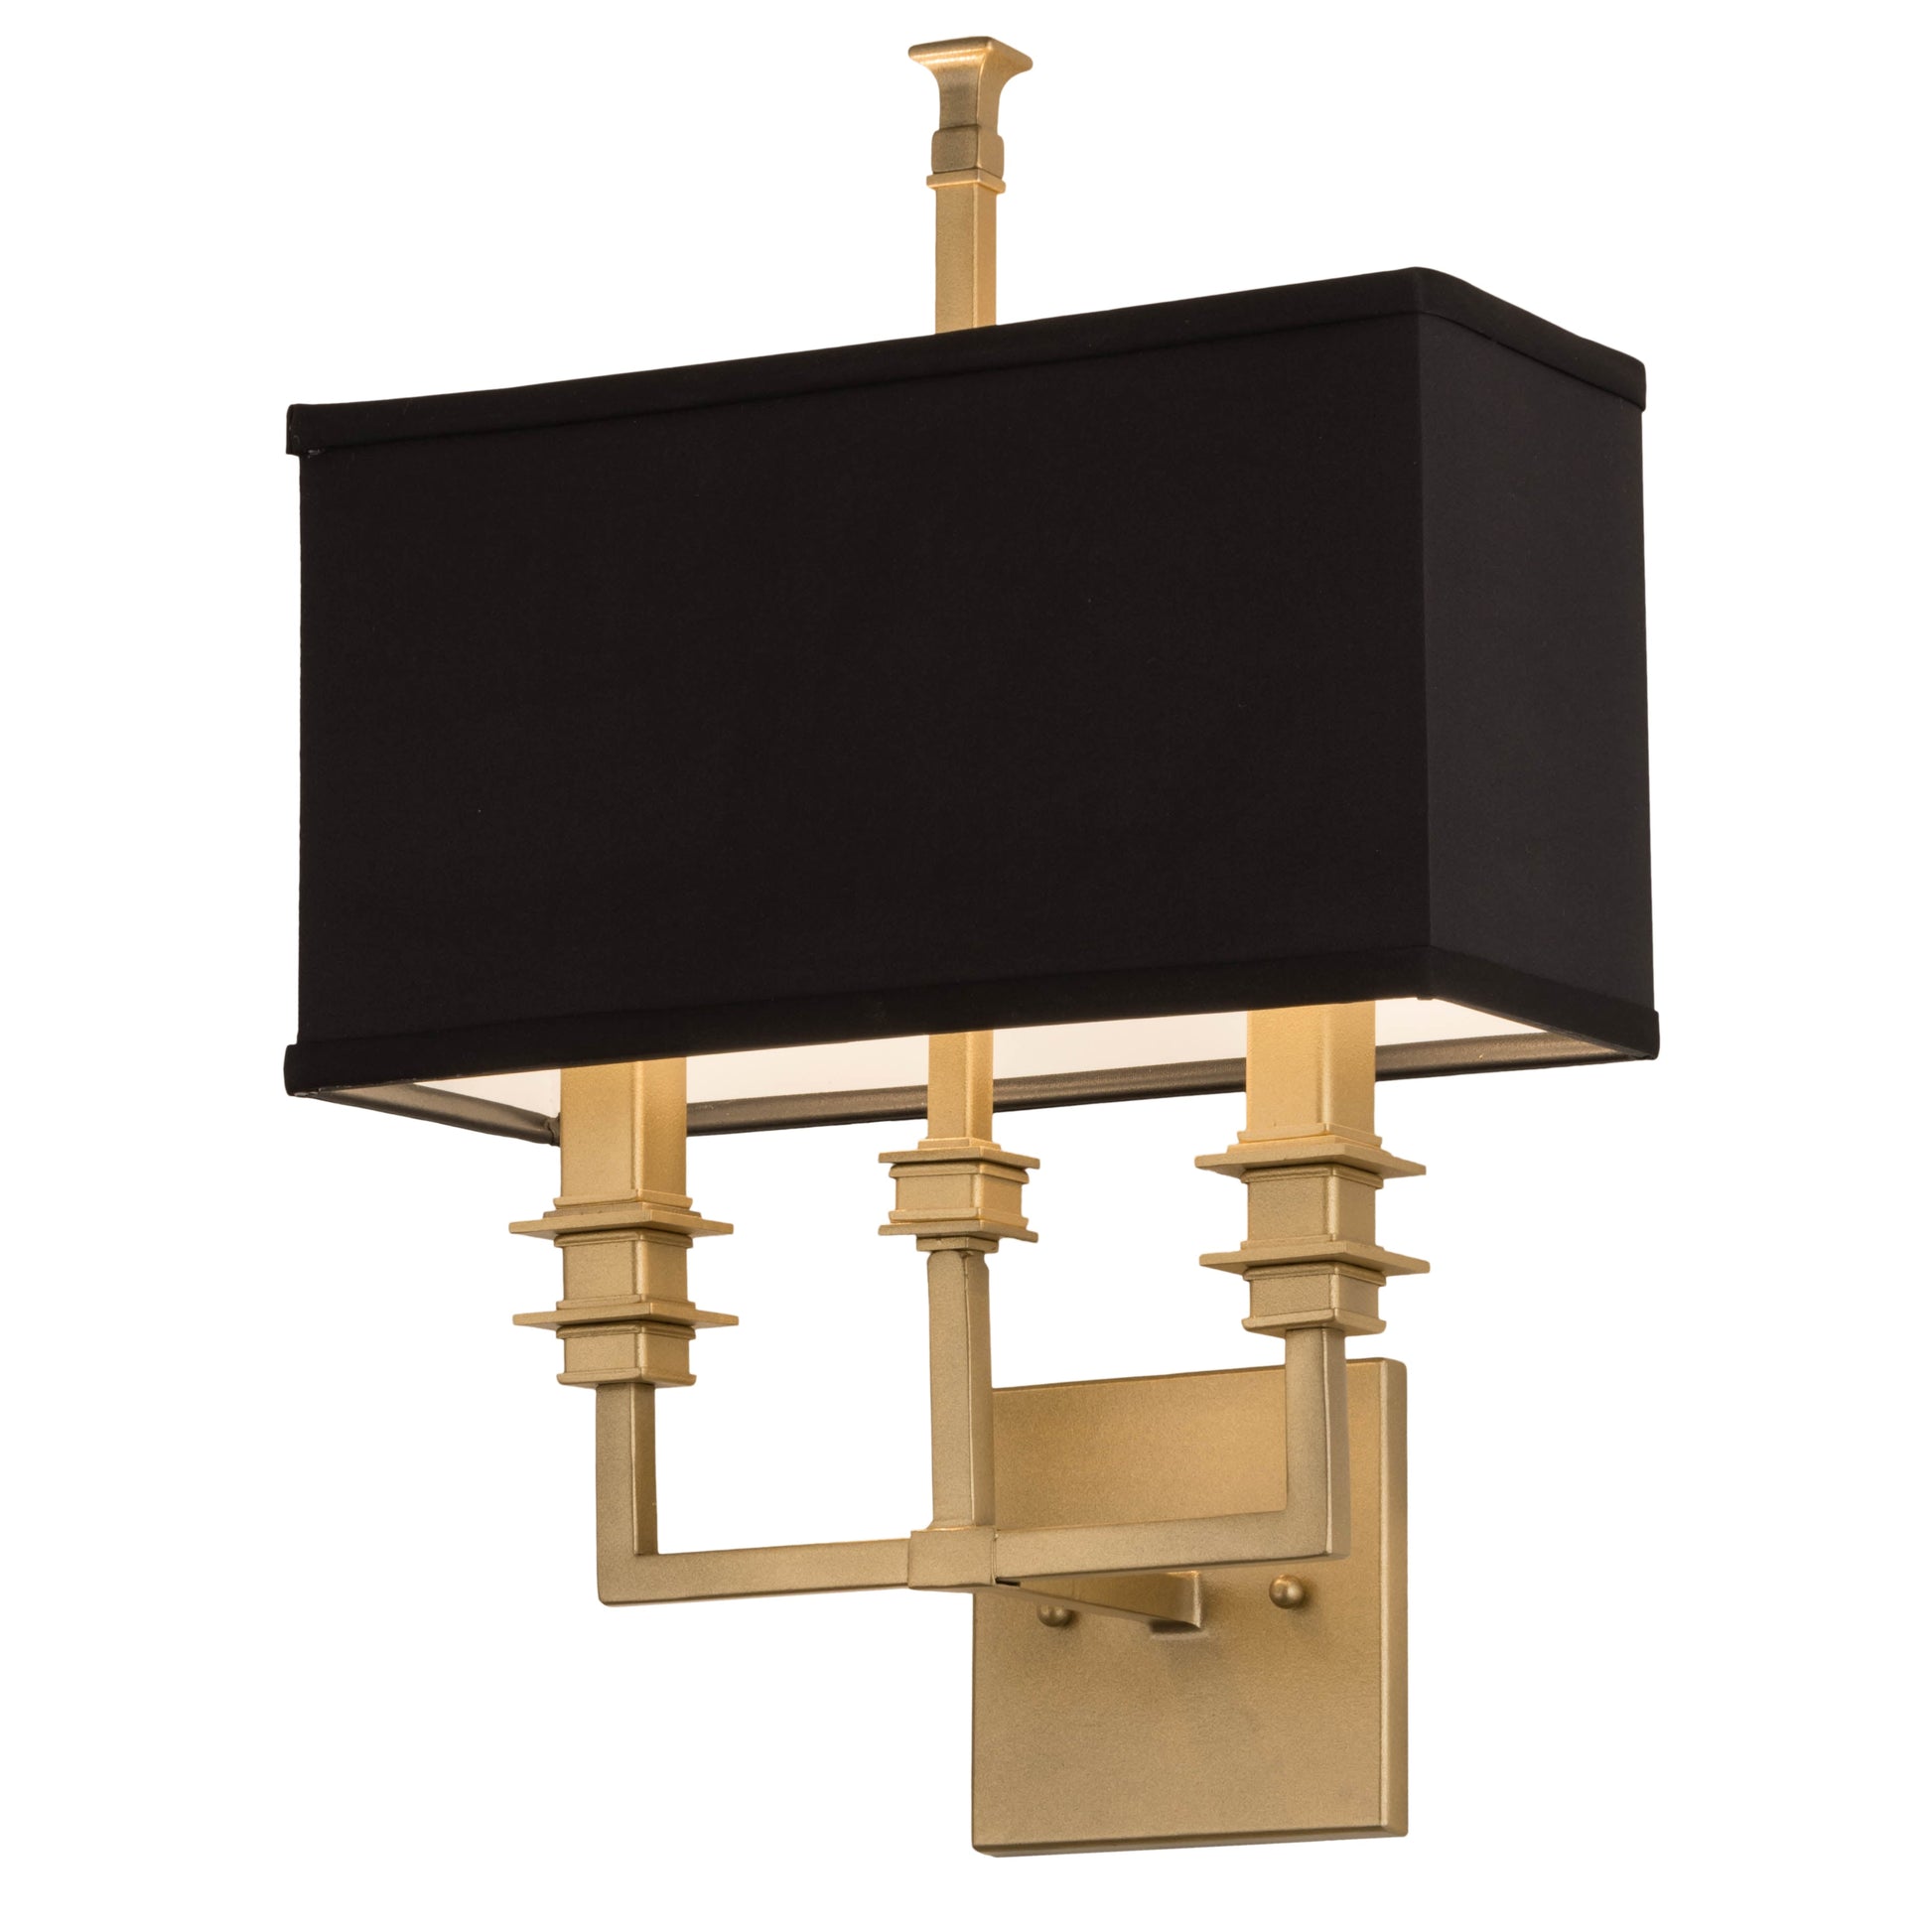 13" Urbanite Wall Sconce by 2nd Ave Lighting